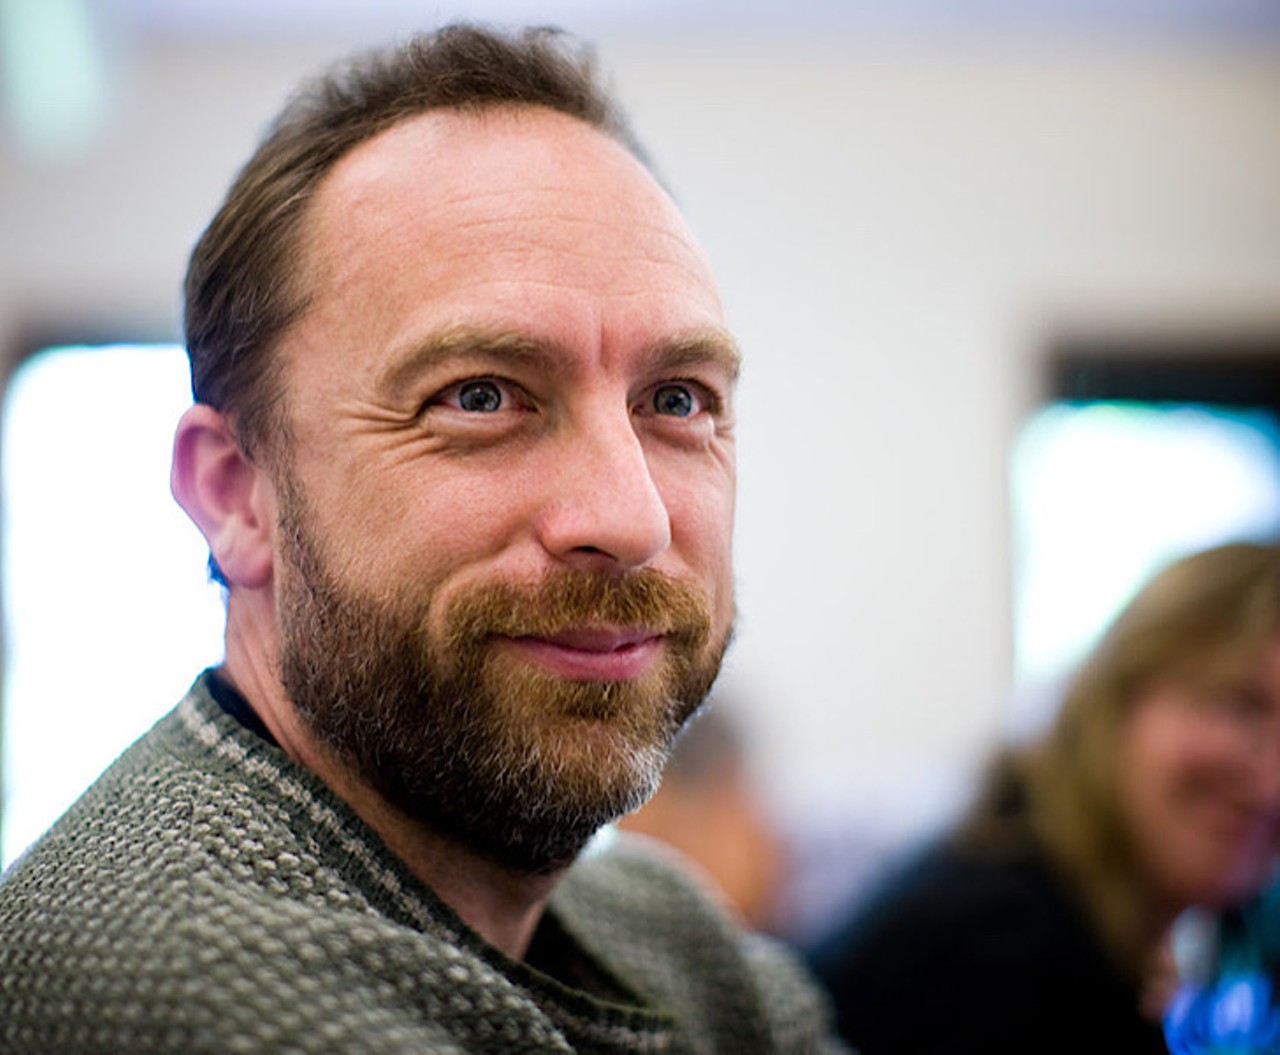 Jimmy Wales
One of the founders of Wikipedia, Jimmy Wales lived in St. Pete from 2002 until he moved to London in 2012. Wales claims to be the sole founder of Wikipedia, but &#147;co-founders&#148; of the website such as Larry Sanger, dispute this claim. 
Photo Joi Ito via Wikimedia Commons